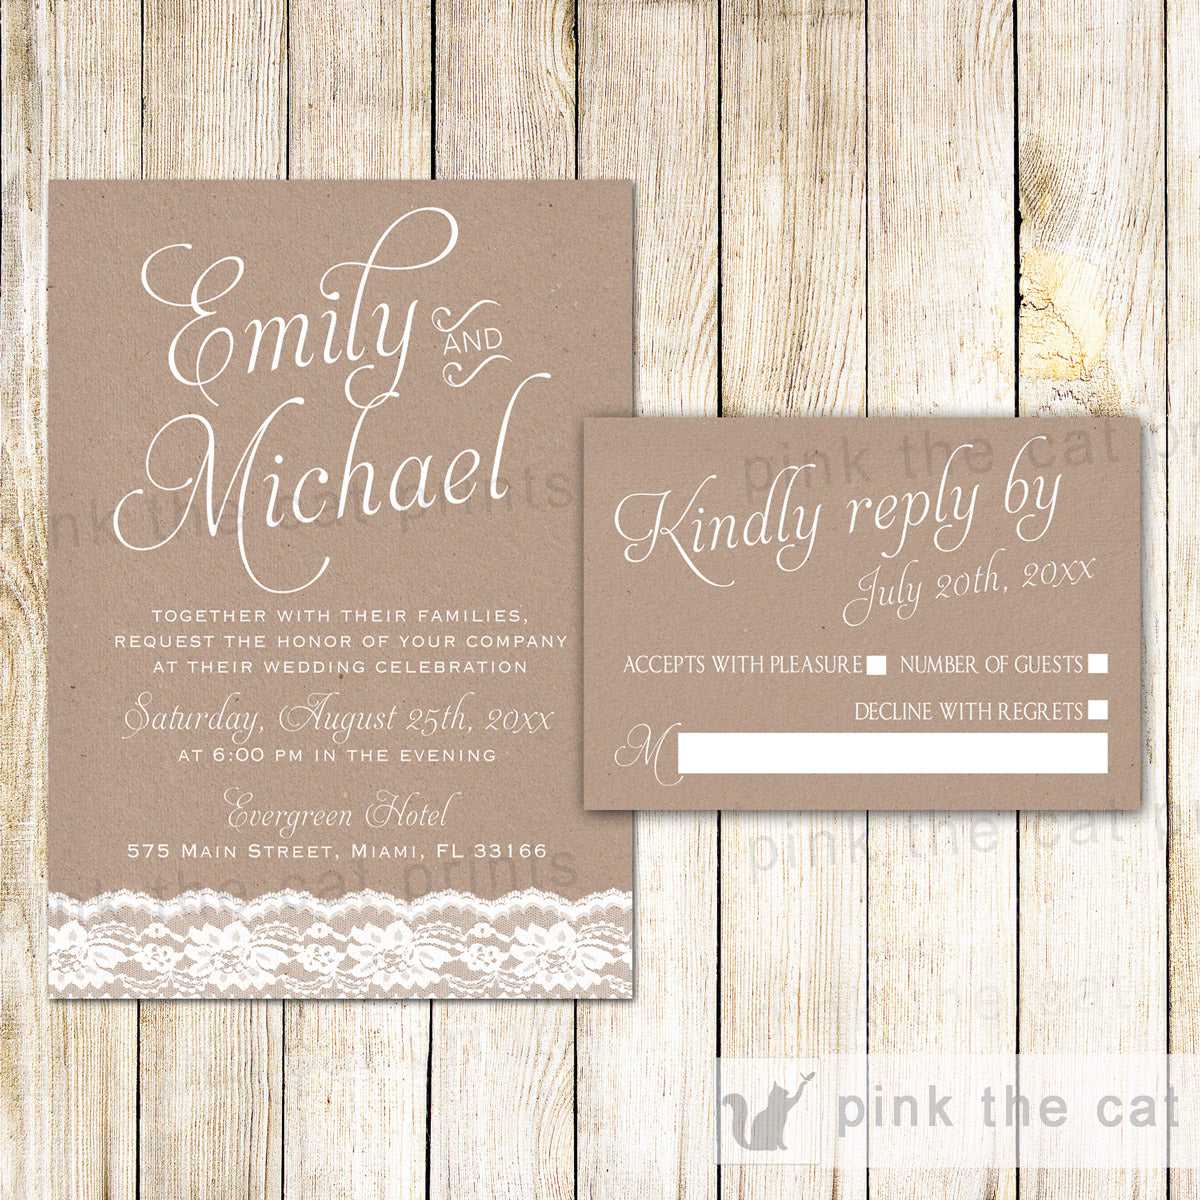 Lace Rustic Wedding Invitation &  RSVP Card  Pink The Cat